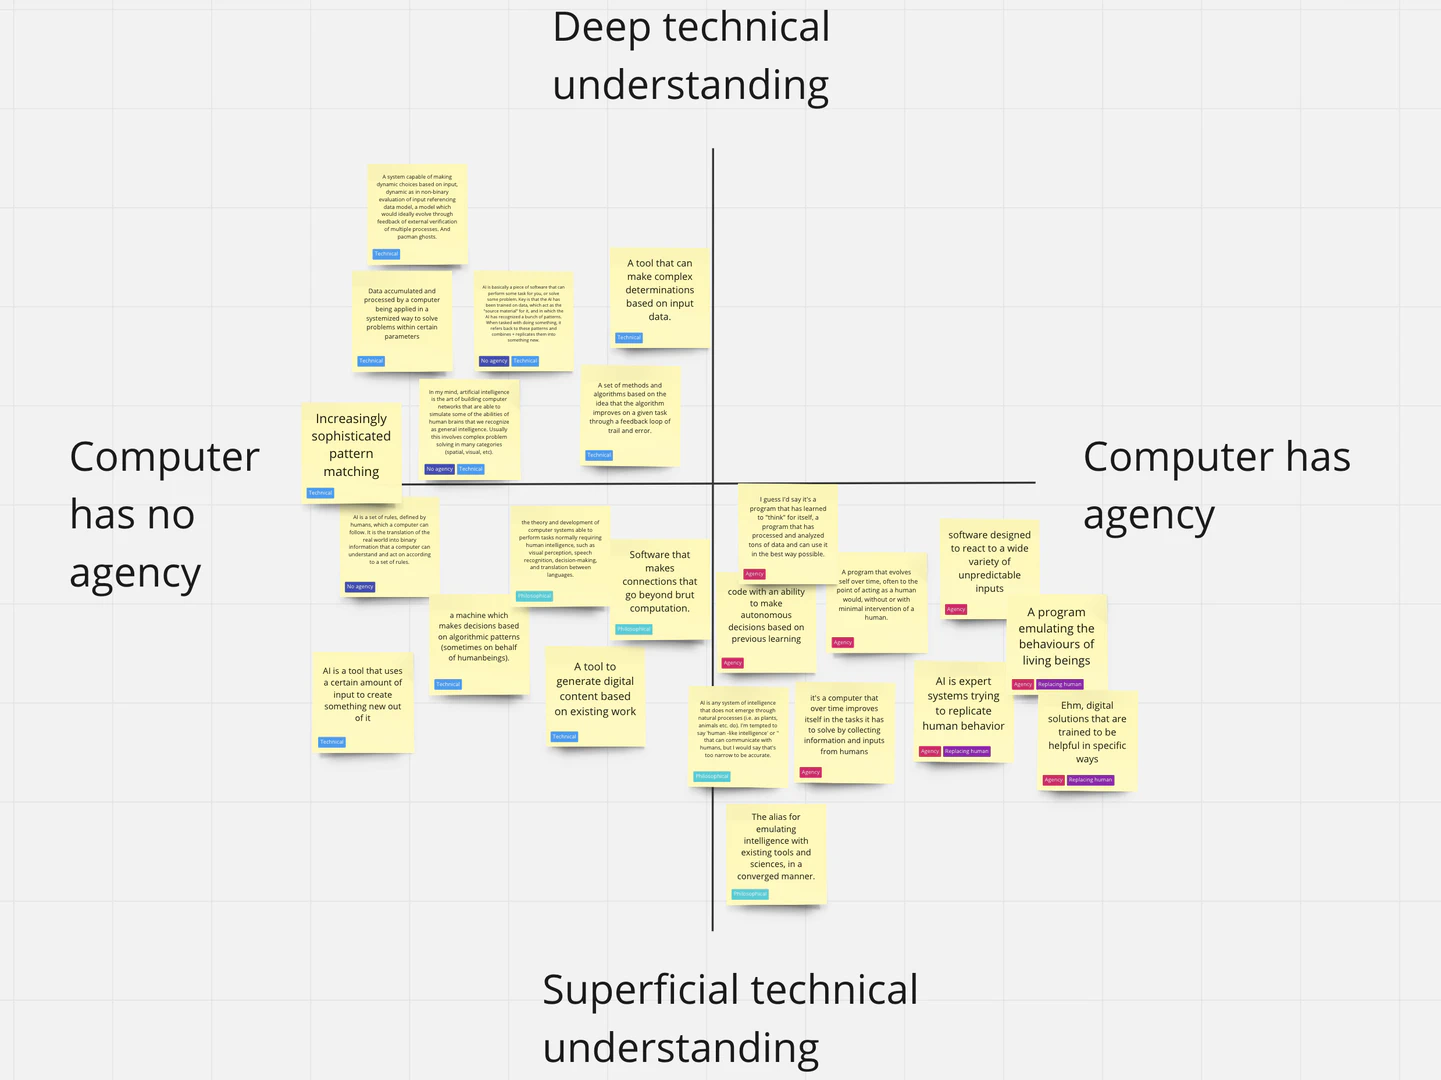 Screenshot of the distribution of answers in terms of their technical depth and ascribed agency of AI.